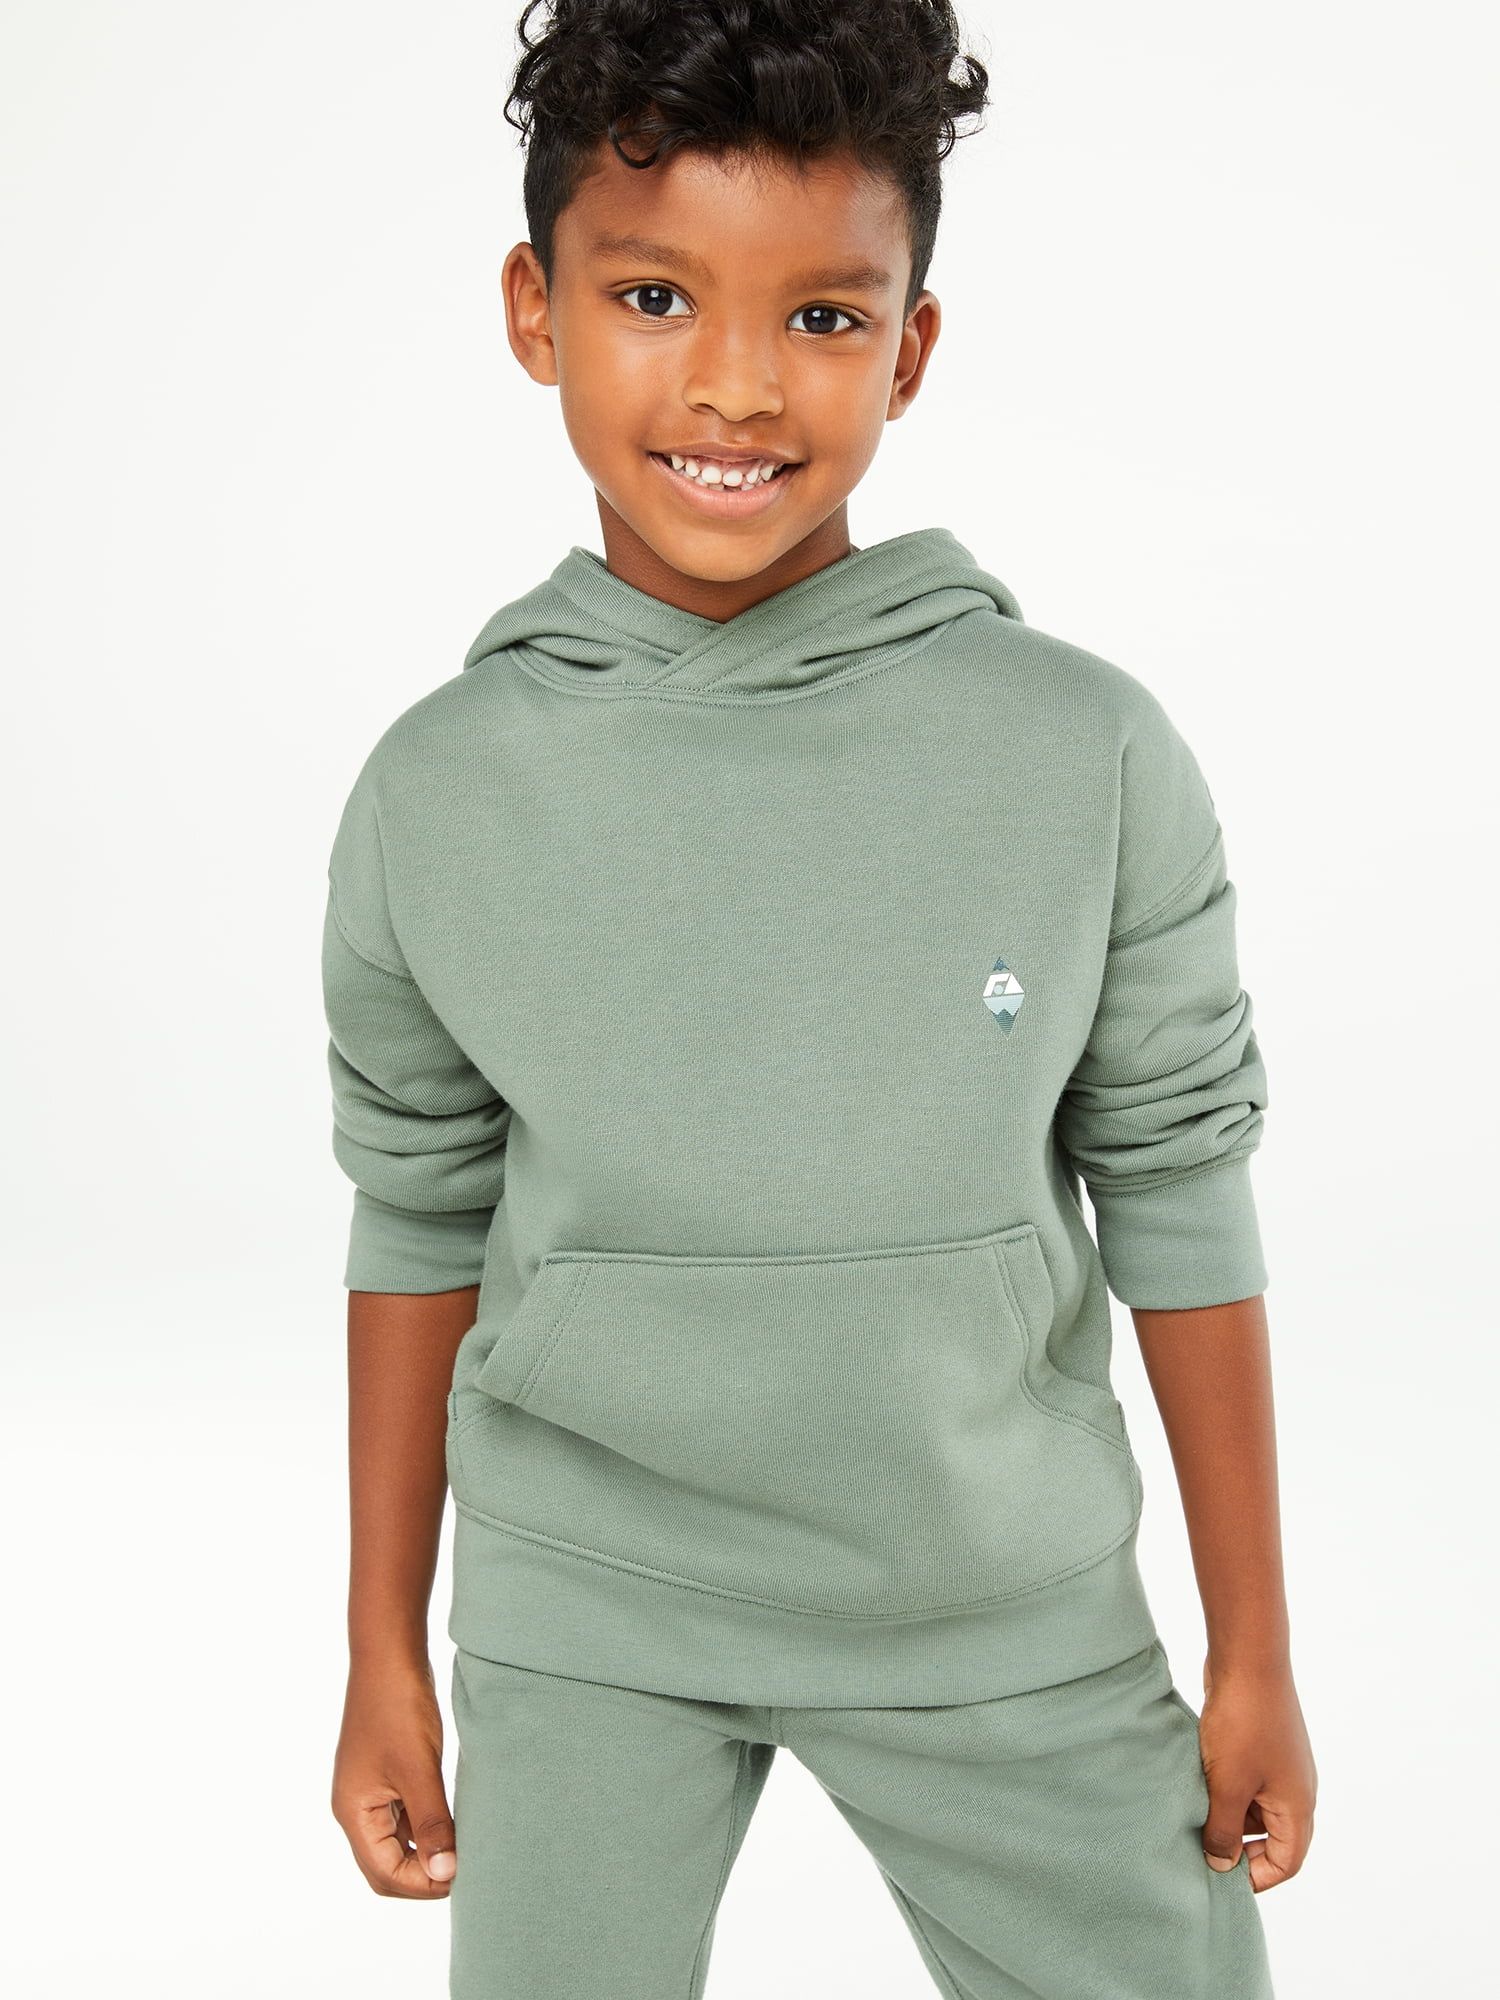 Free Assembly Boys Long Sleeve Graphic Print Hoodie, Sizes 4-18 | Walmart (US)